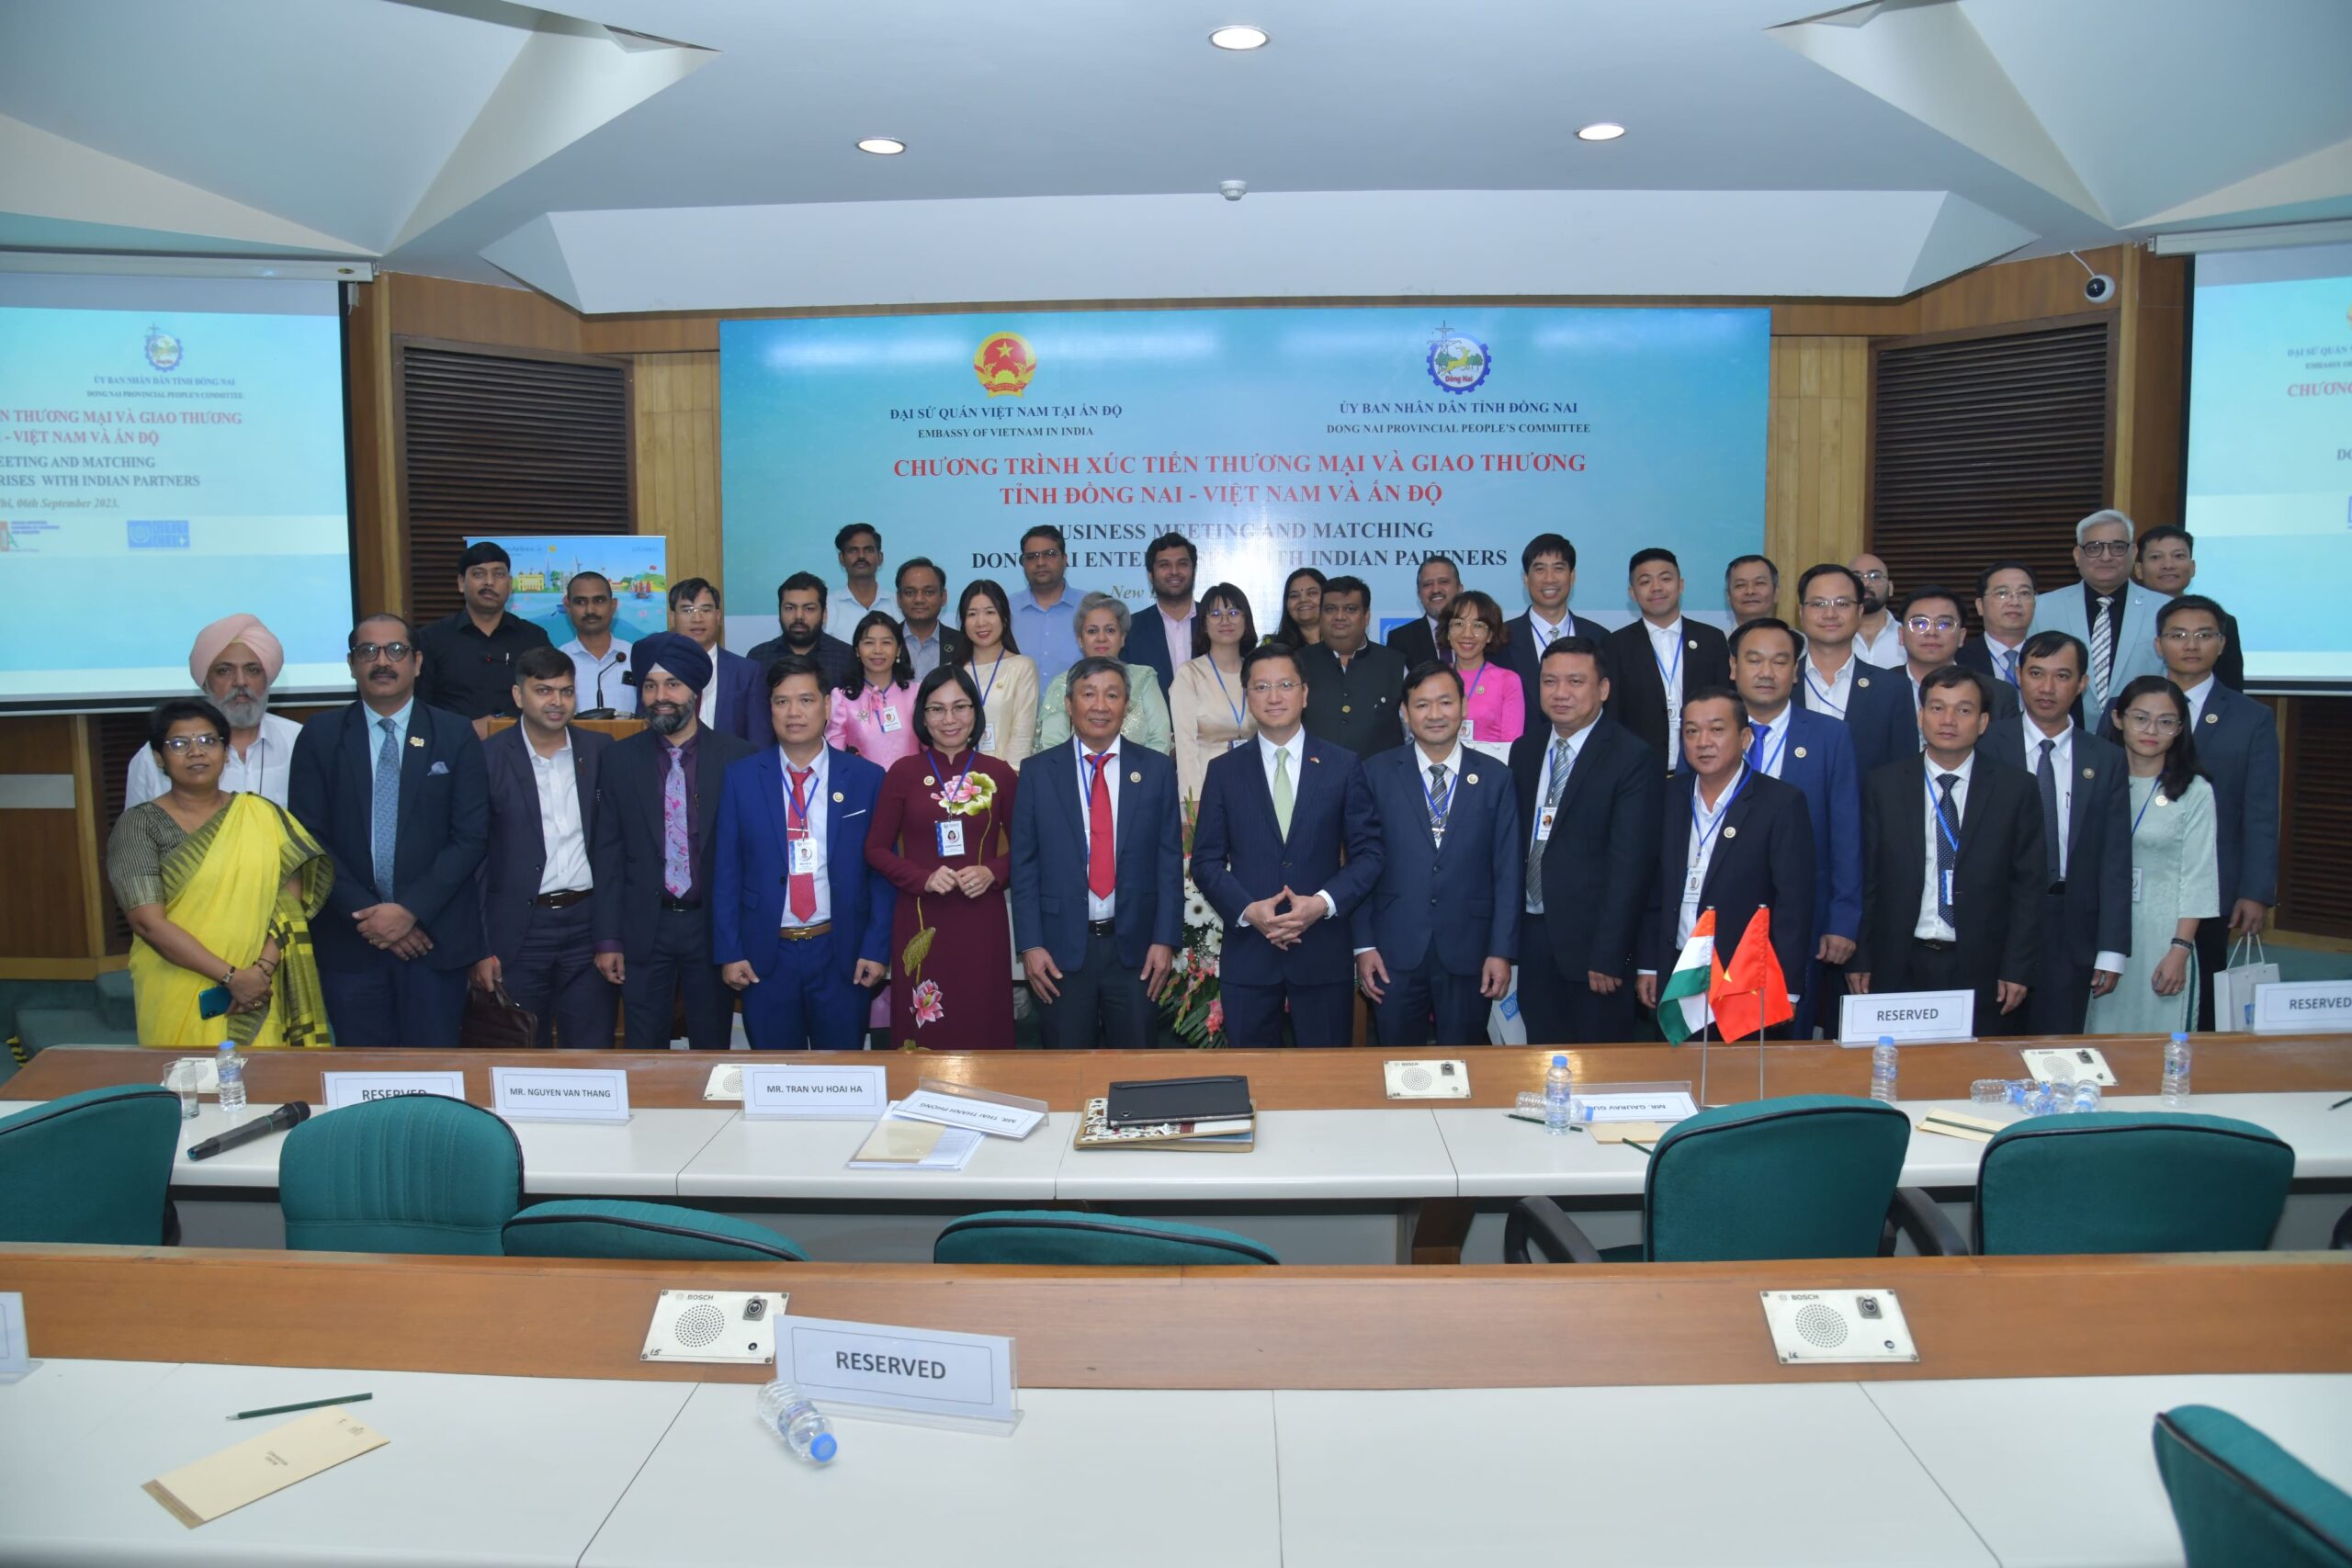 HIGH LEVEL DELEGATION FROM DONG NAI – VIETNAM HOSTED BUSINESS MATCHING WITH EMBASSY OF VIETNAM & GTTCI